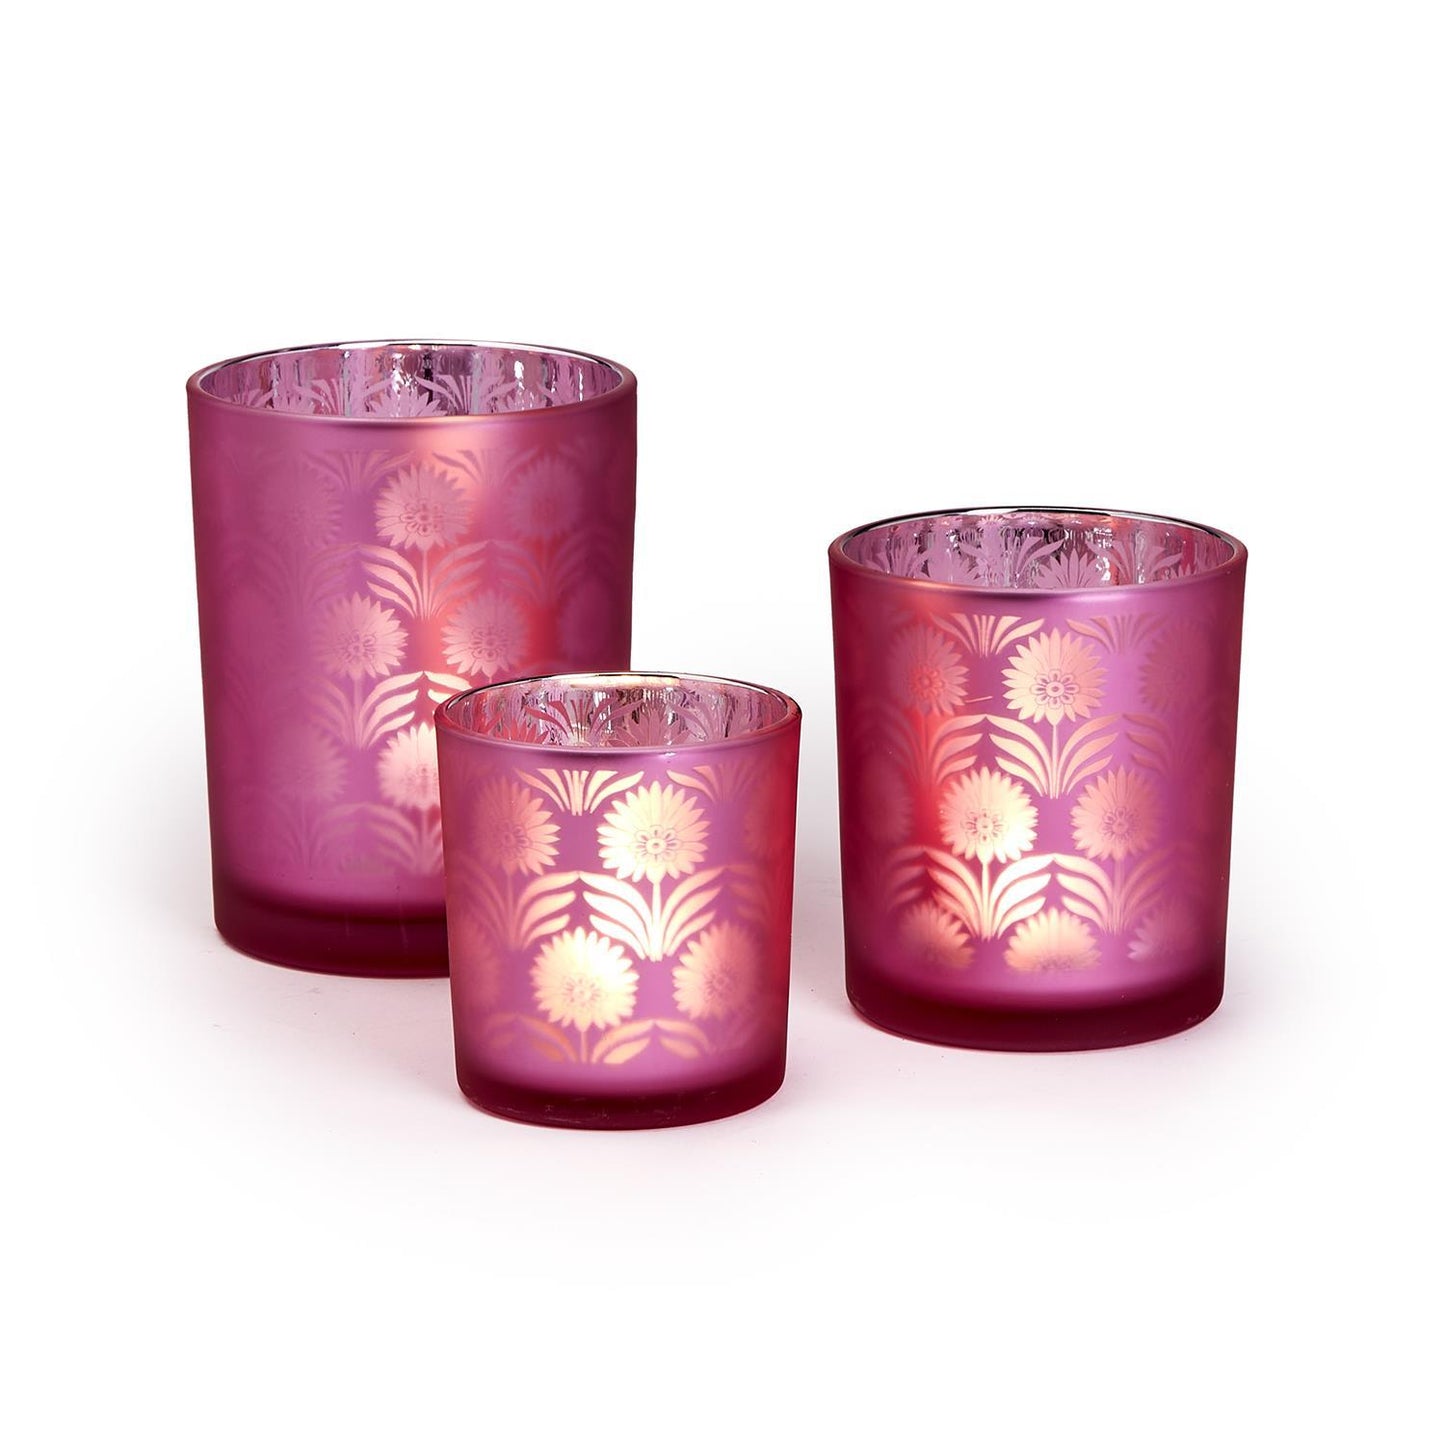 Palm Silhouette Candleholder